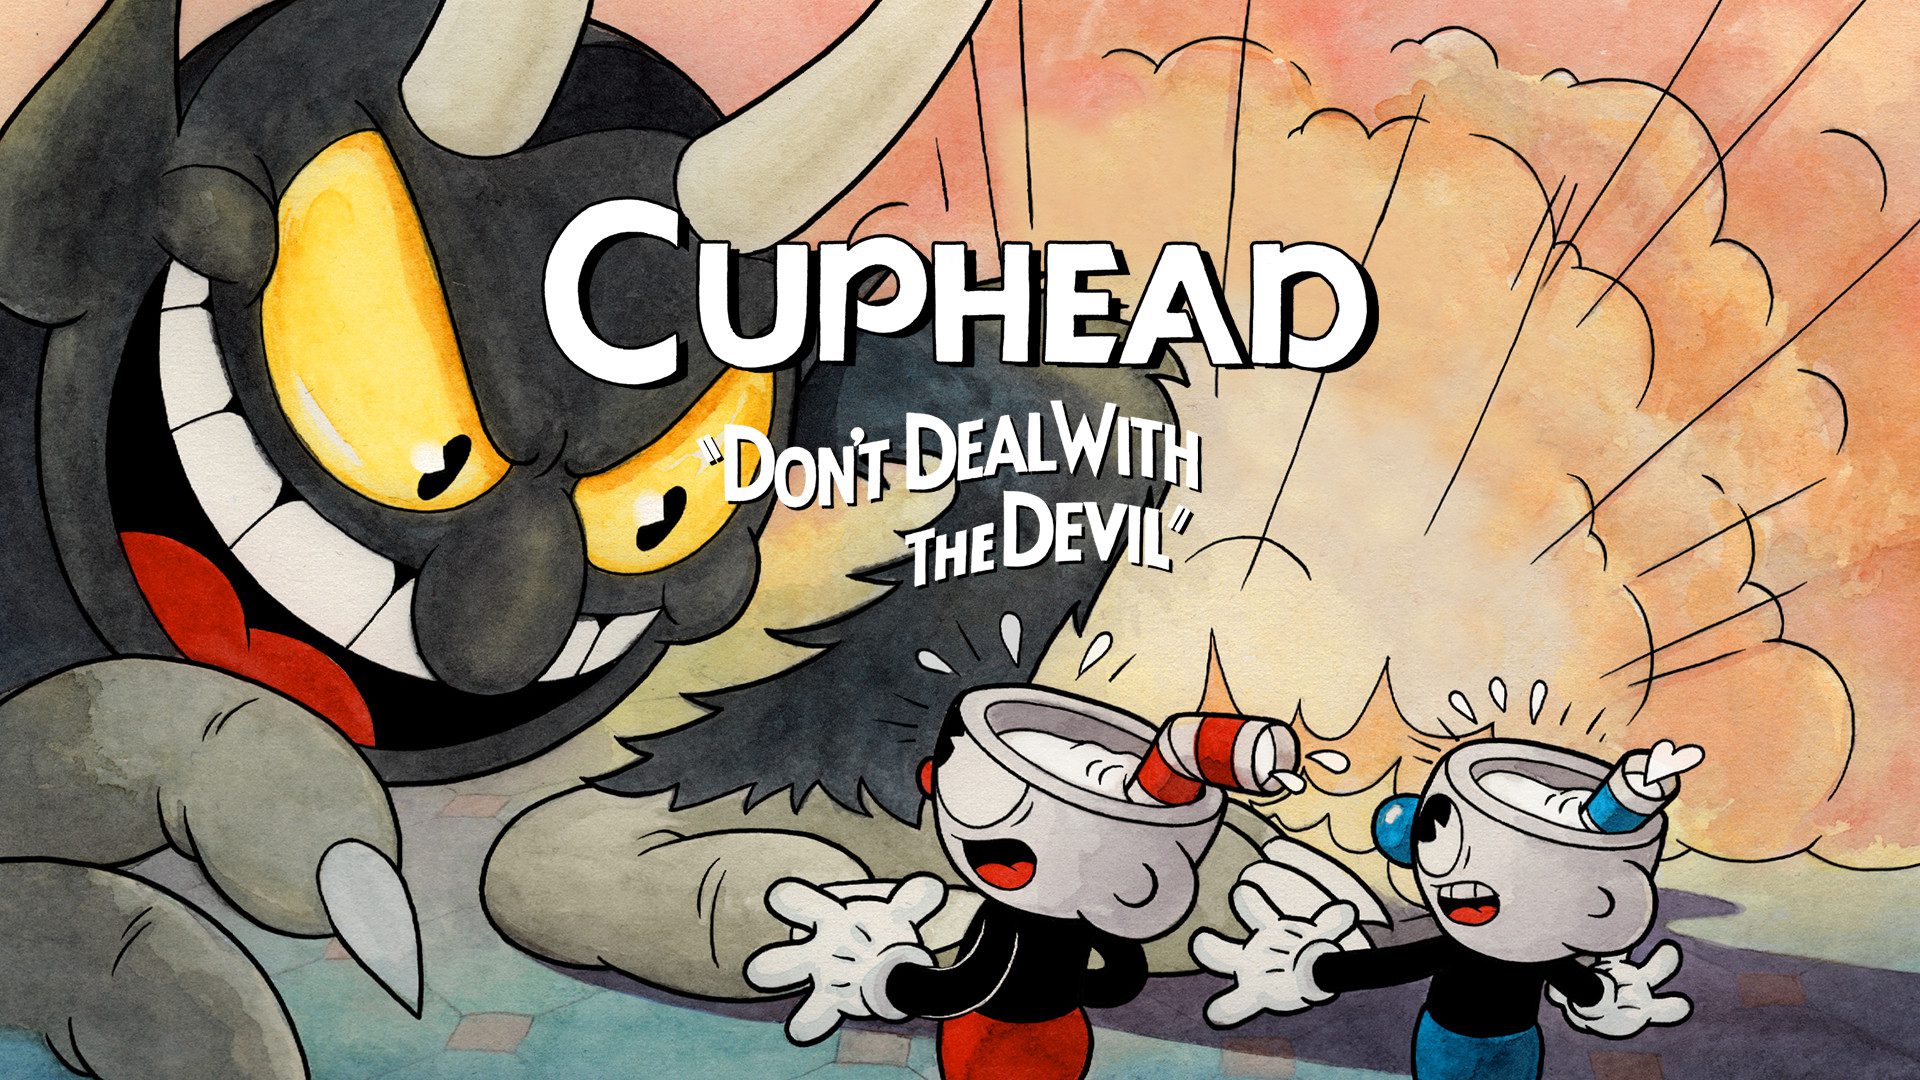 Justin Trudeau Praises Cuphead for its VGA Victories